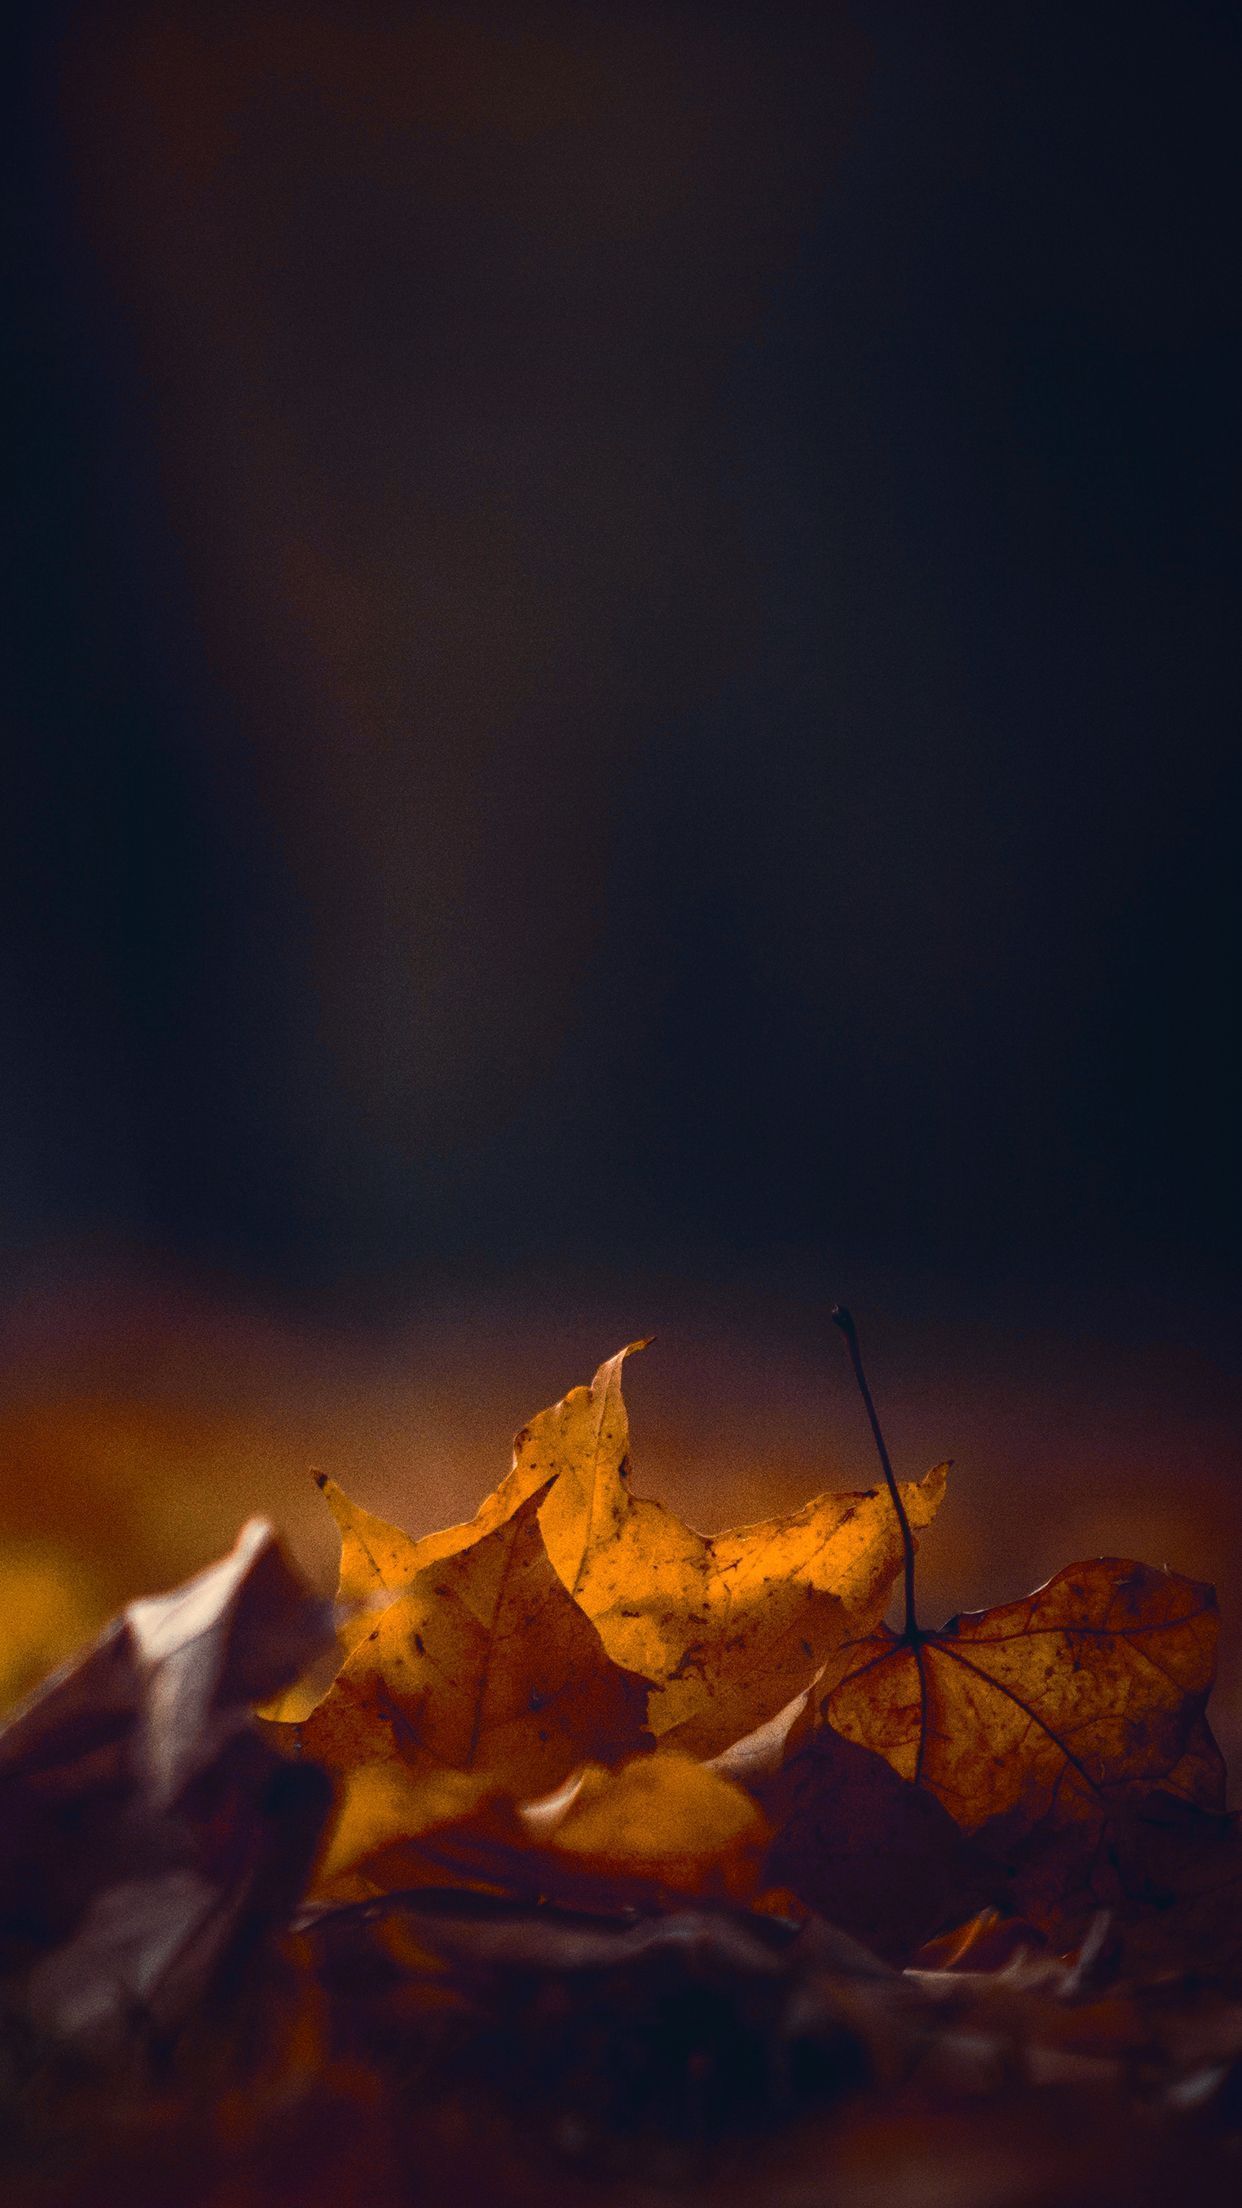 HD autumn wallpaper for your phone HD autumn wallpaper for your phone Wallpaper. aut. iPhone background nature, Phone wallpaper, Background HD wallpaper